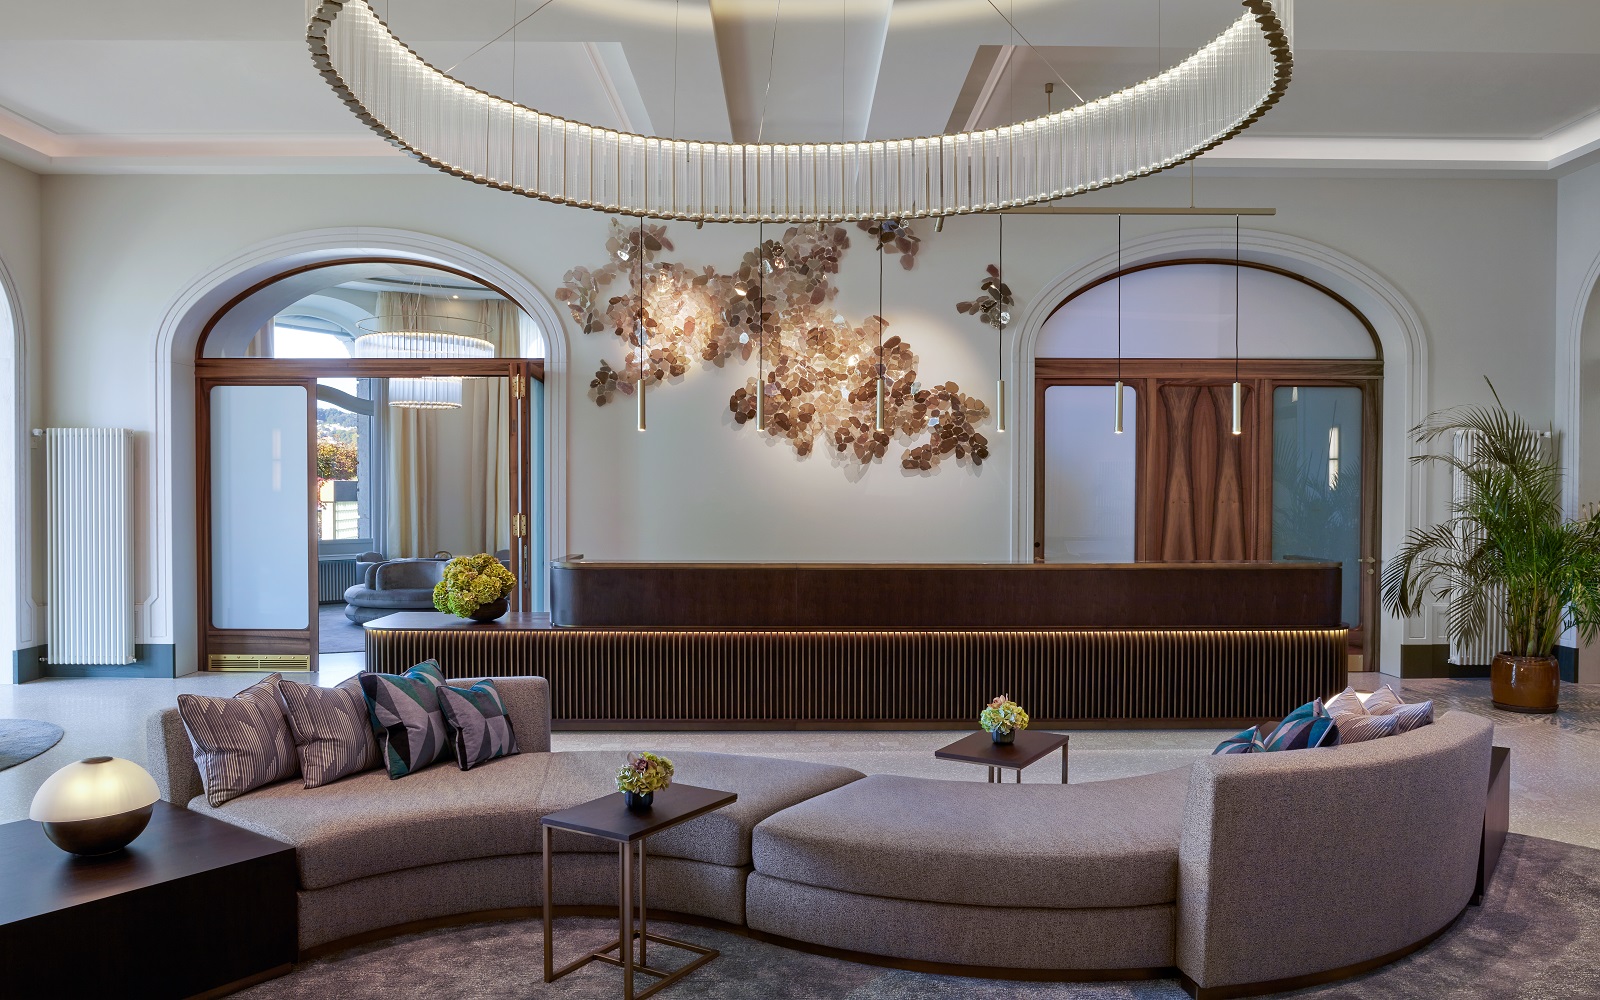 New images from inside Mandarin Oriental Palace Luzern